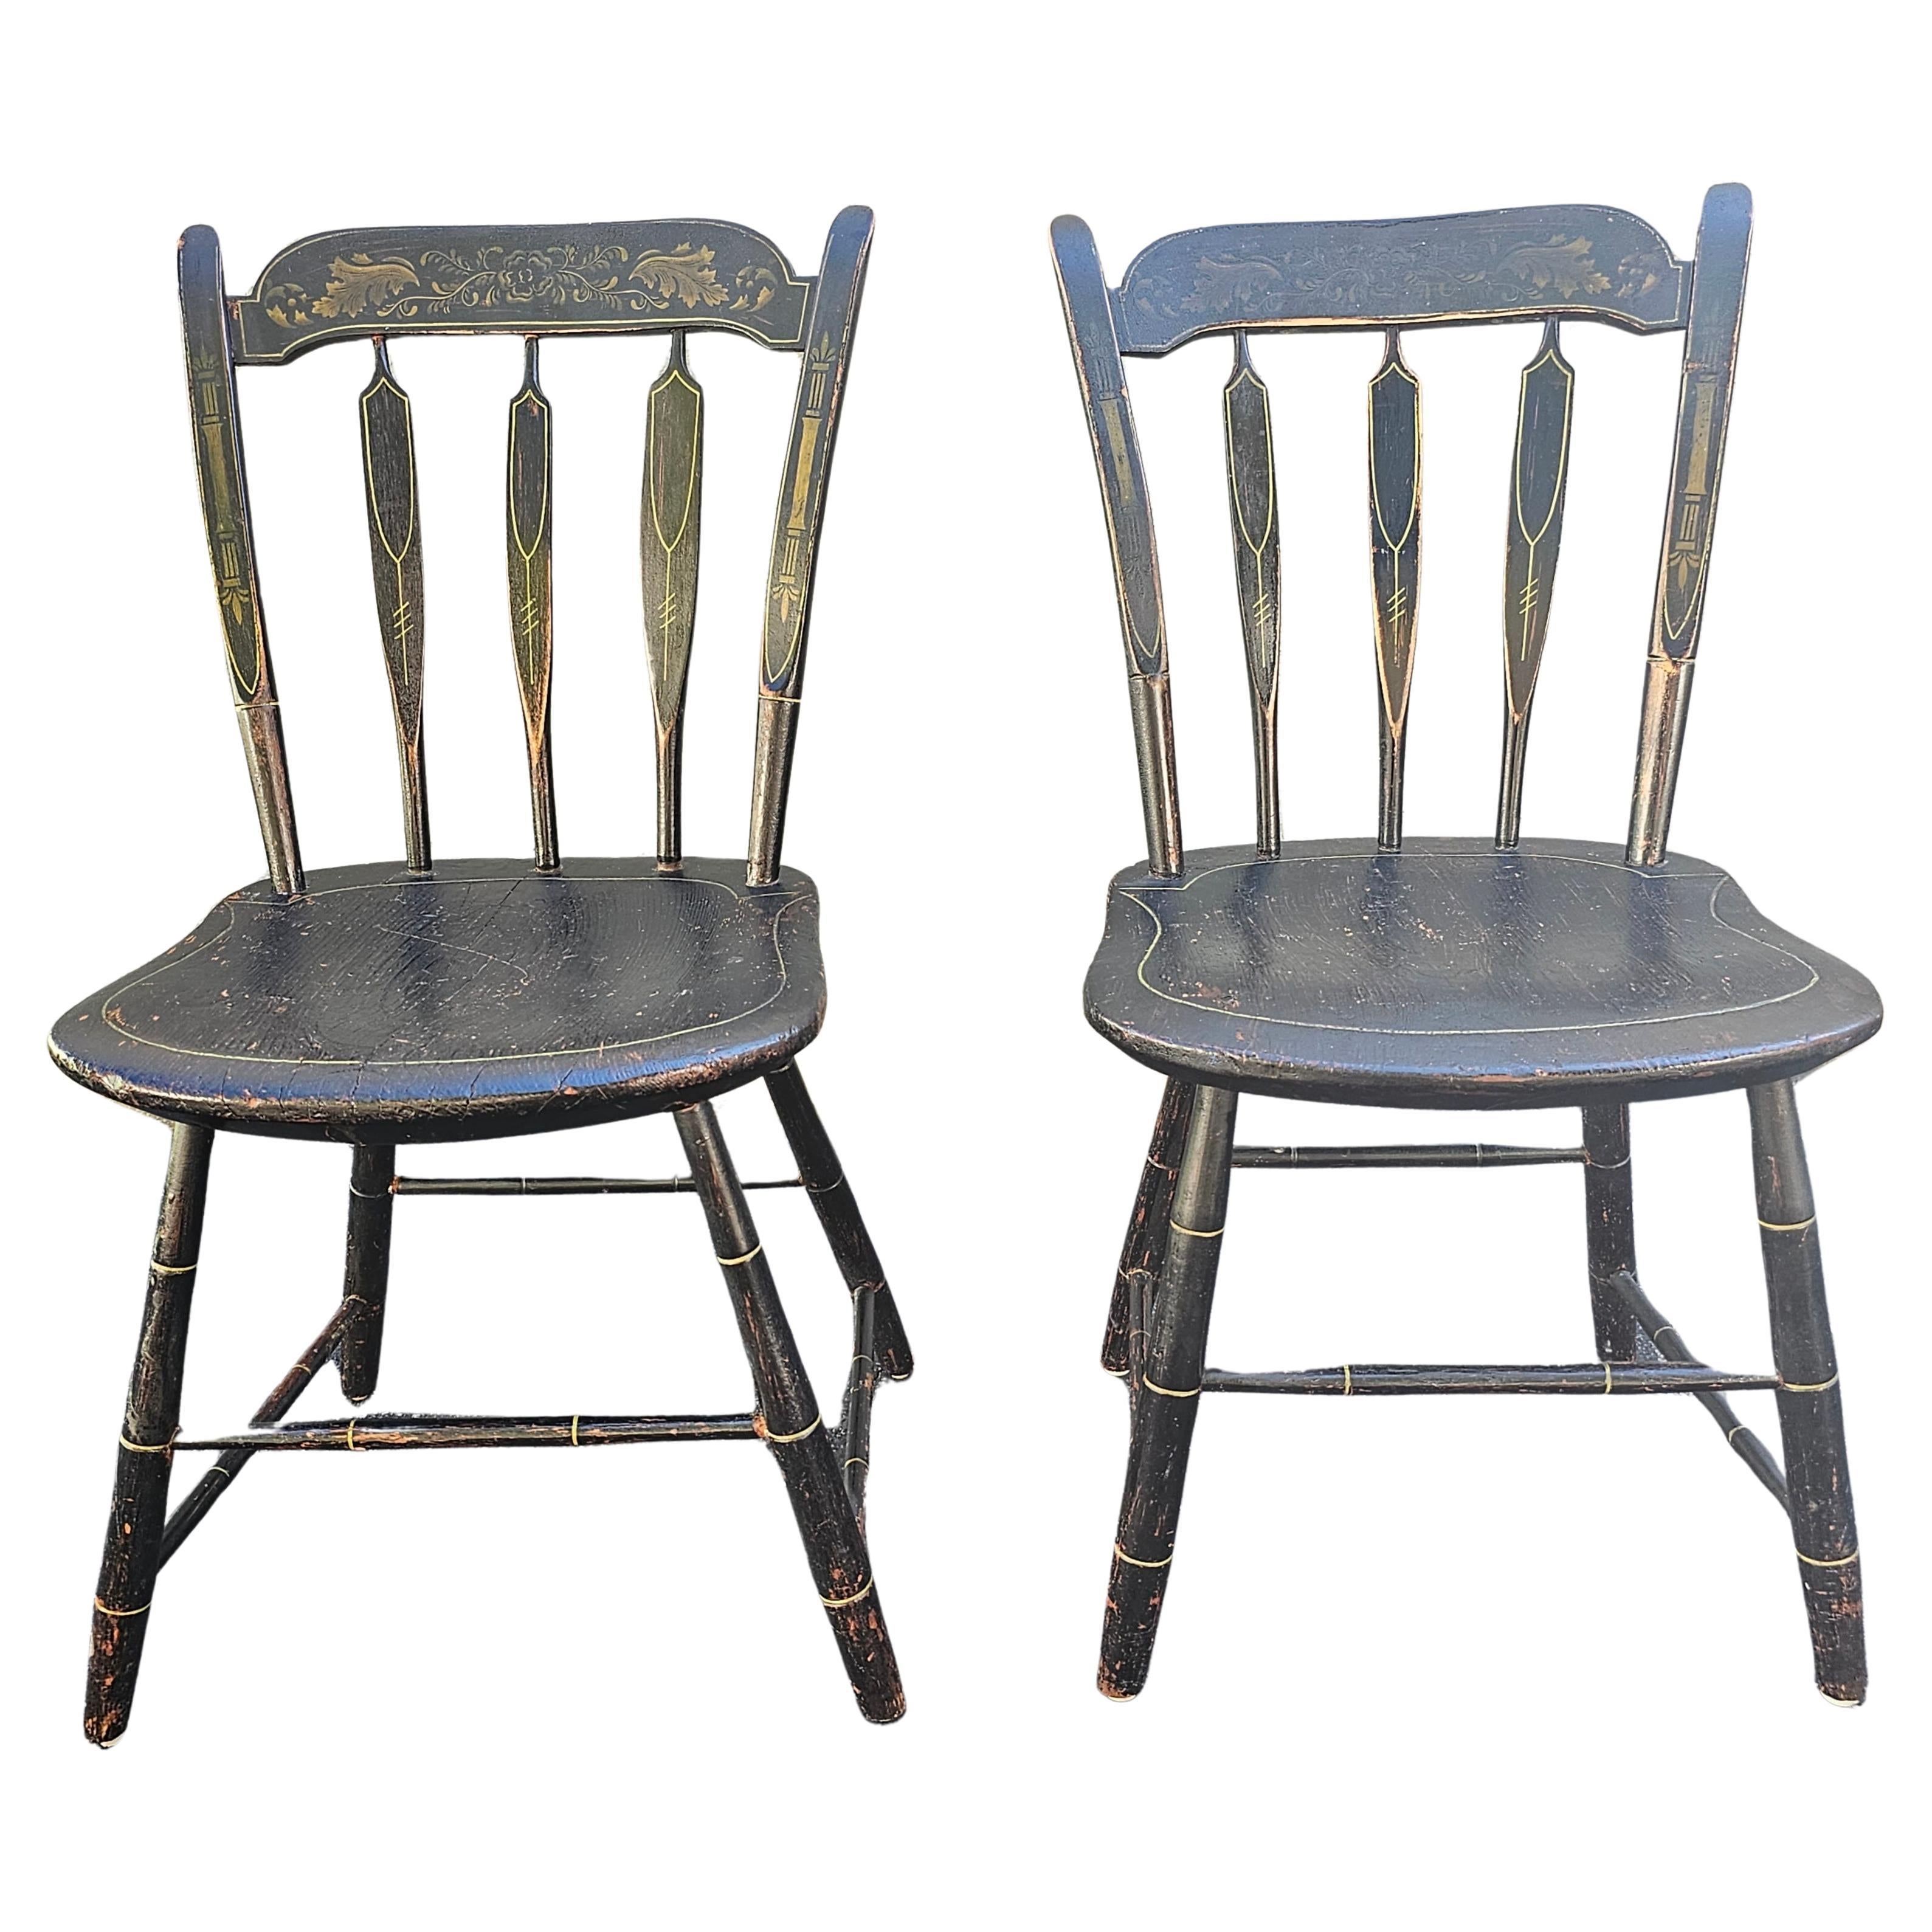 Pair of 19th C. Early American Ebonized and Decorated Side Chairs For Sale